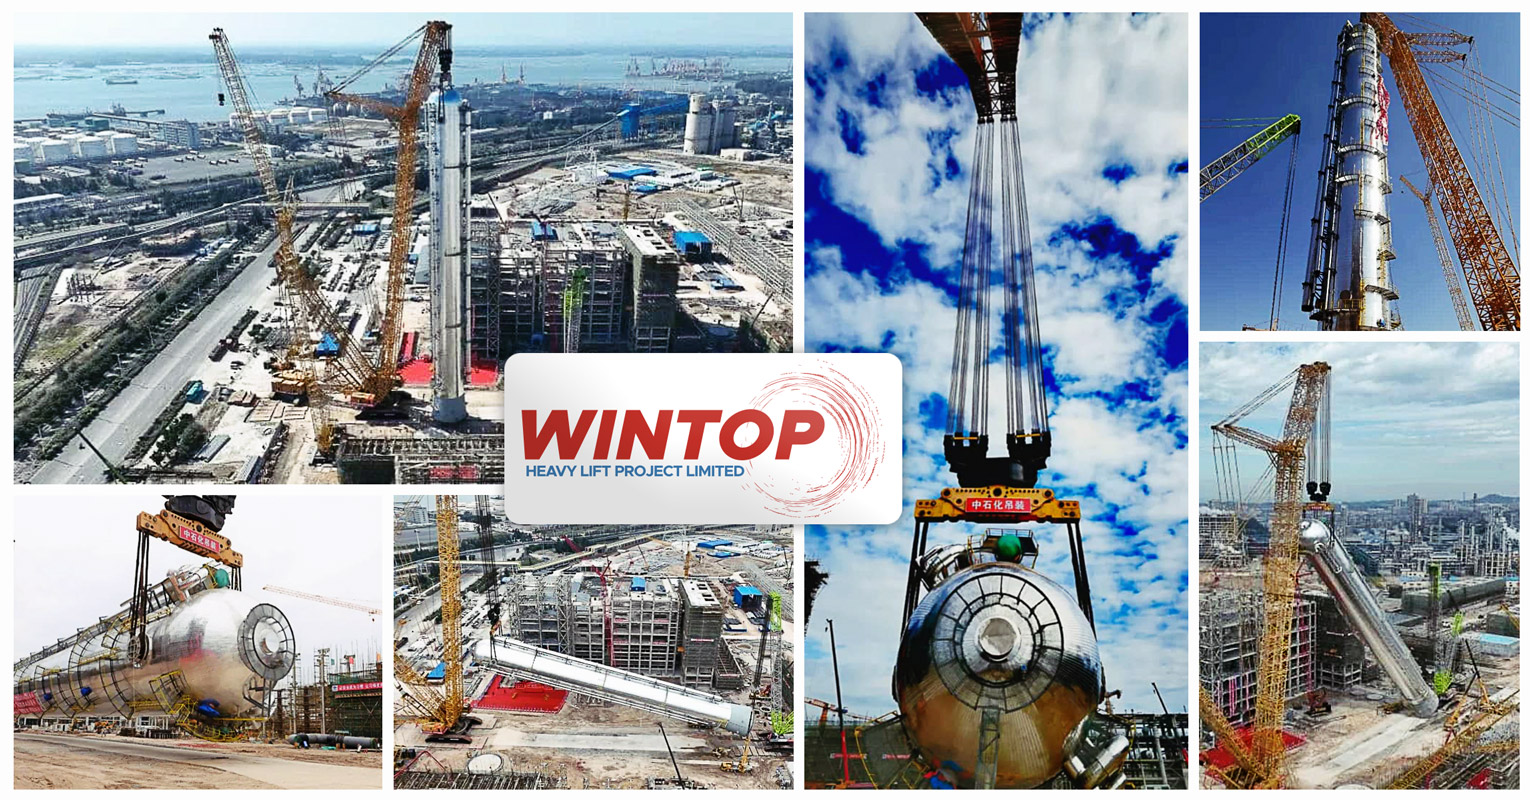 Wintop Heavy Lift Coordinated the Lifting of a Propylene and Propane Separation Tower